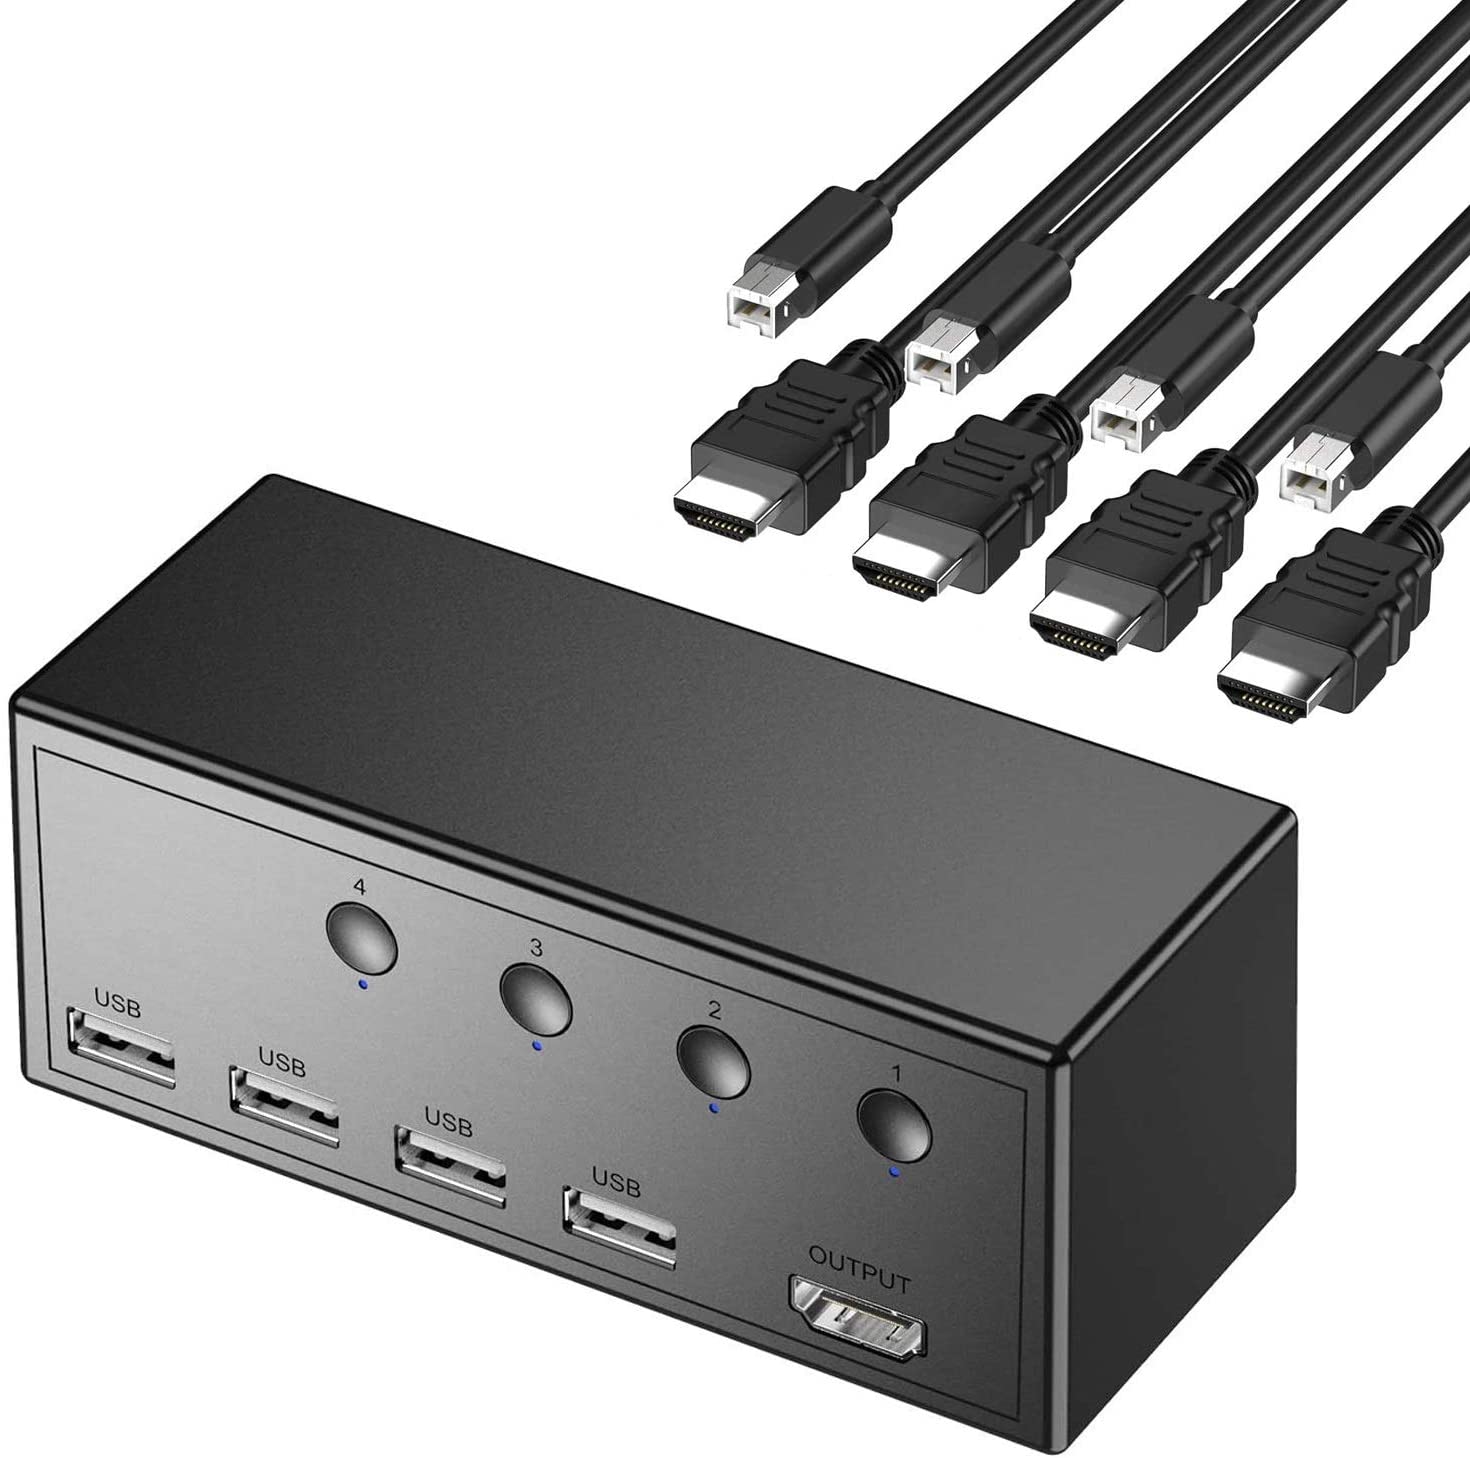 Rybozen 4 Ports HDMI KVM Switch Box, 4 USB 2.0 Hub, UHD 4Kx2K @30Hz & 3D & 1080P Supported and Wireless Keyboard Mouse, Share 4 Computers with one Keyboard Mouse and HD Monitor, with 4 USB-B and HDMI 